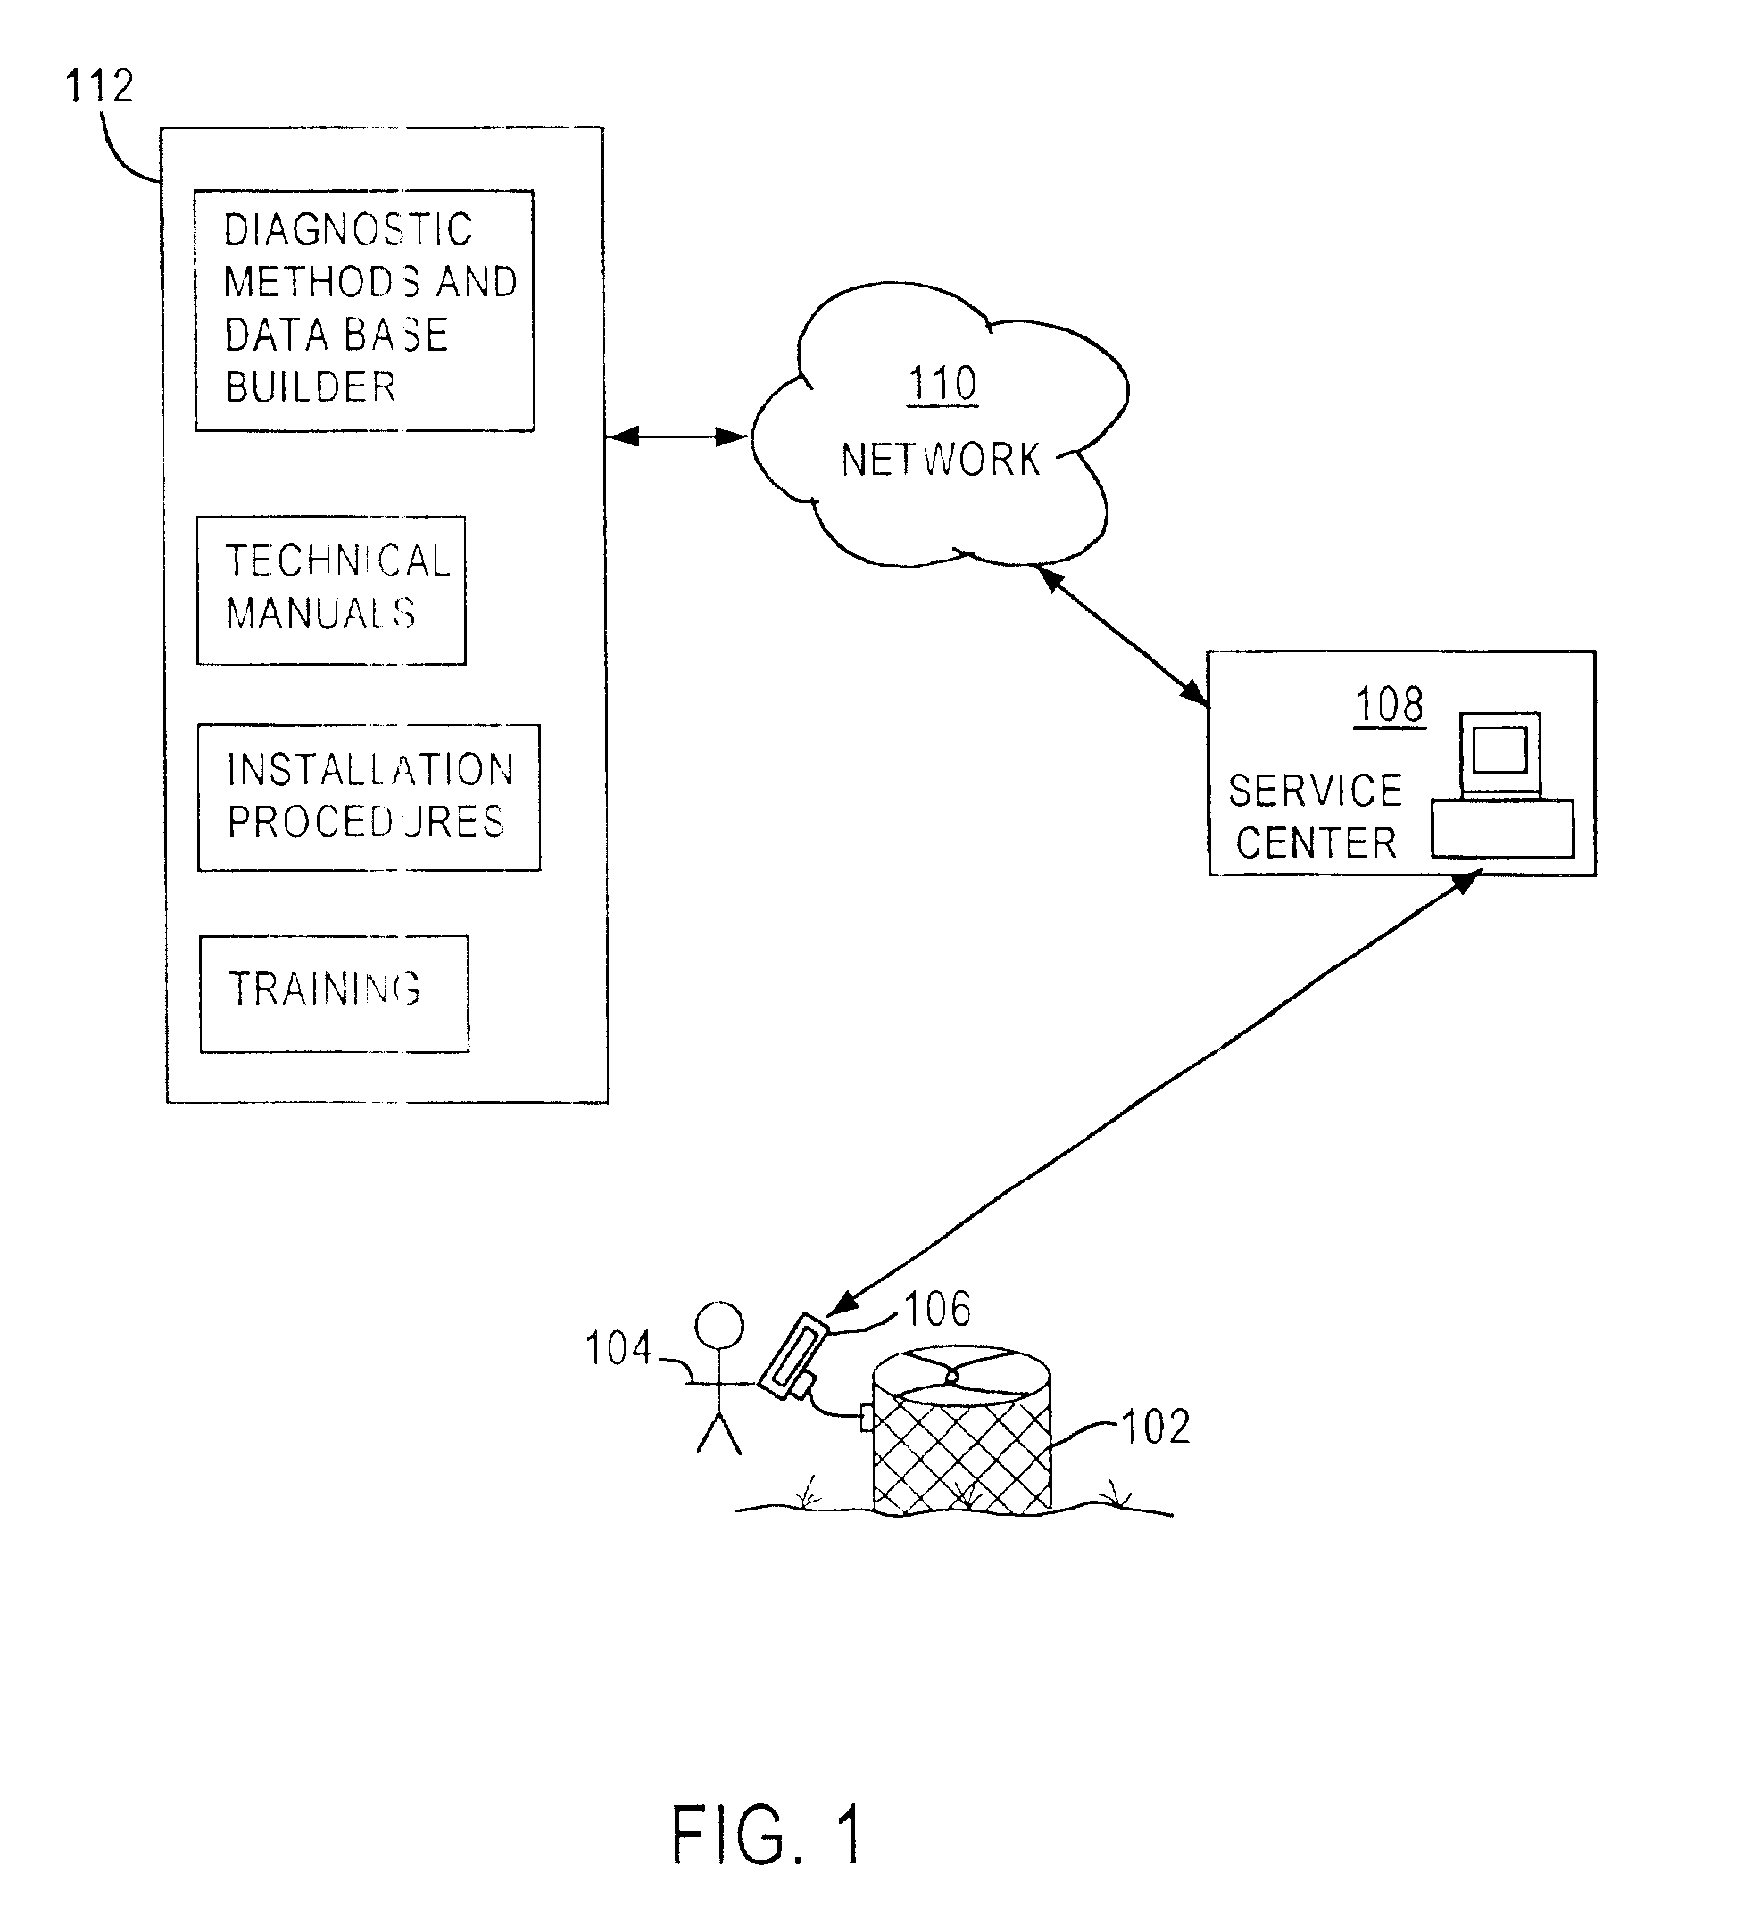 System and method for performing diagnostics using a portable device displaying diagnostic data using templates